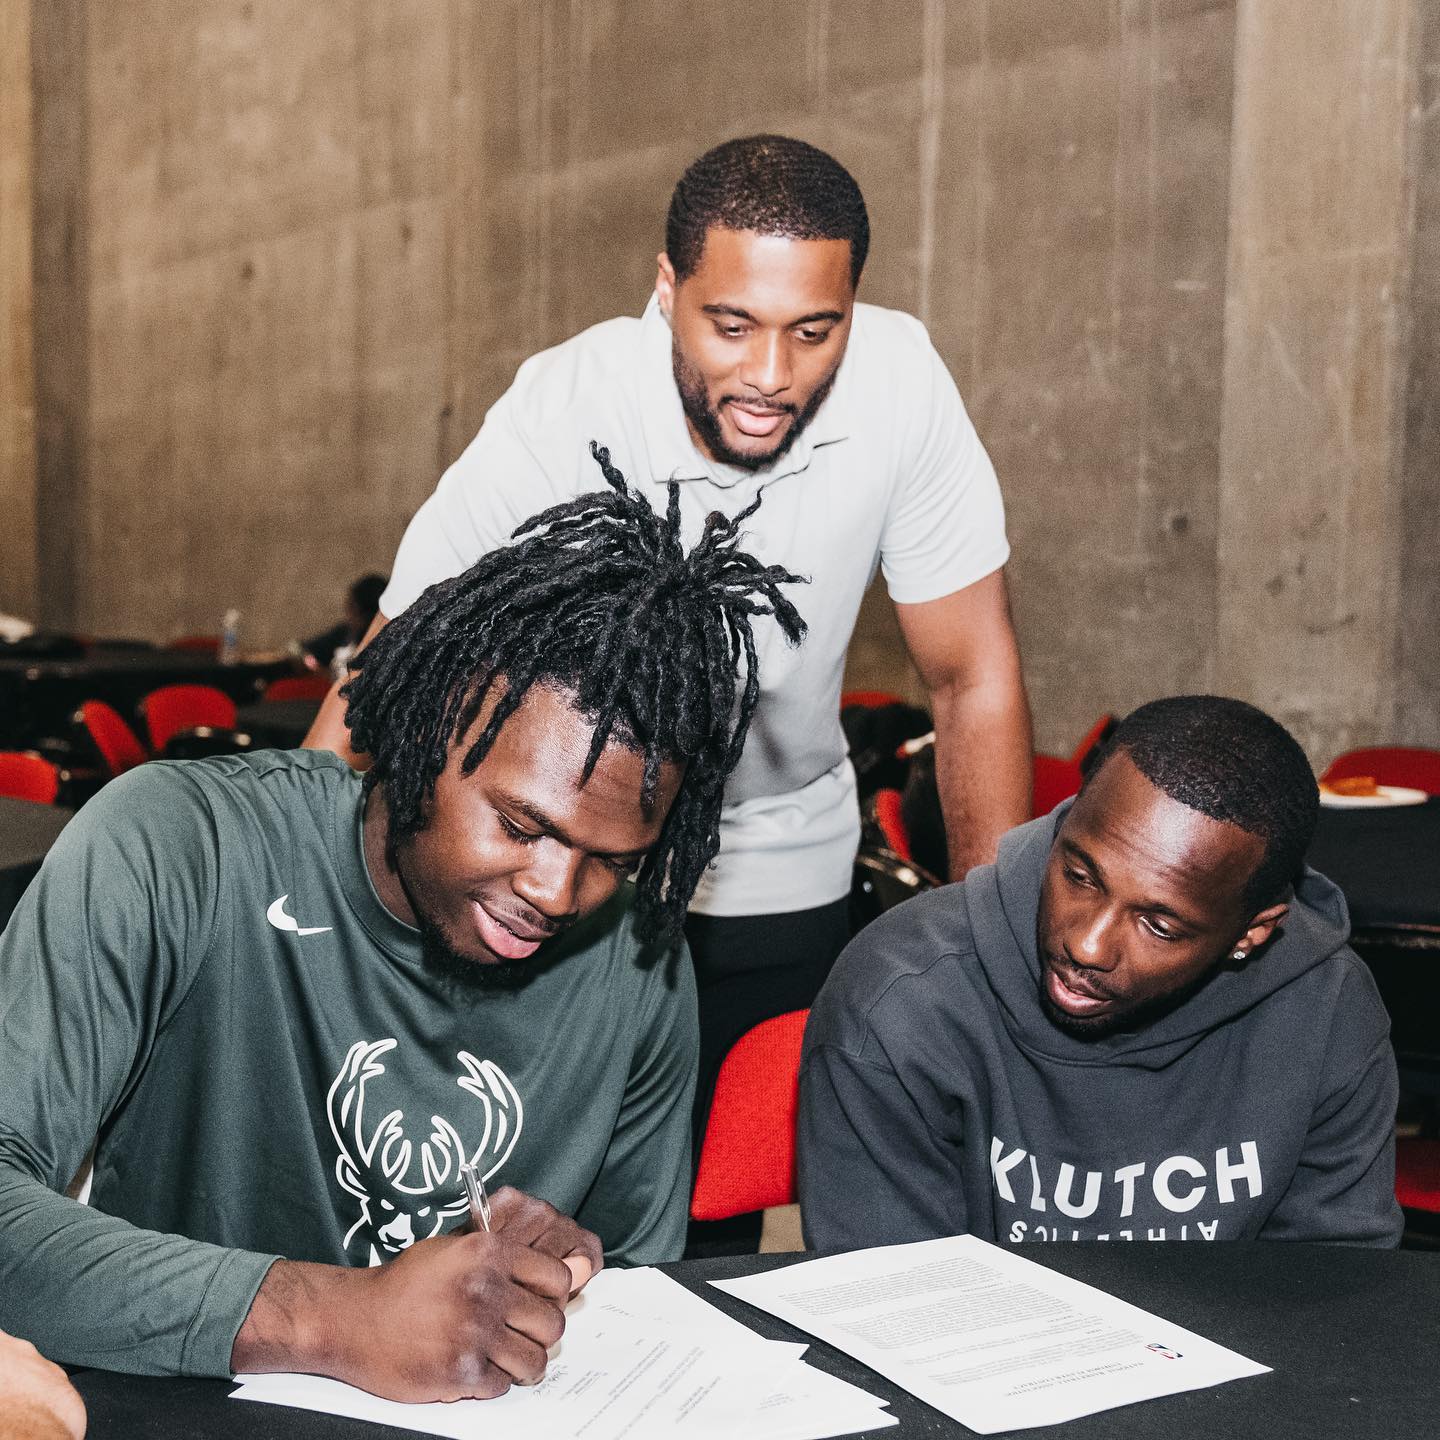 Rich Paul At One Of The Contract Signings With His Players